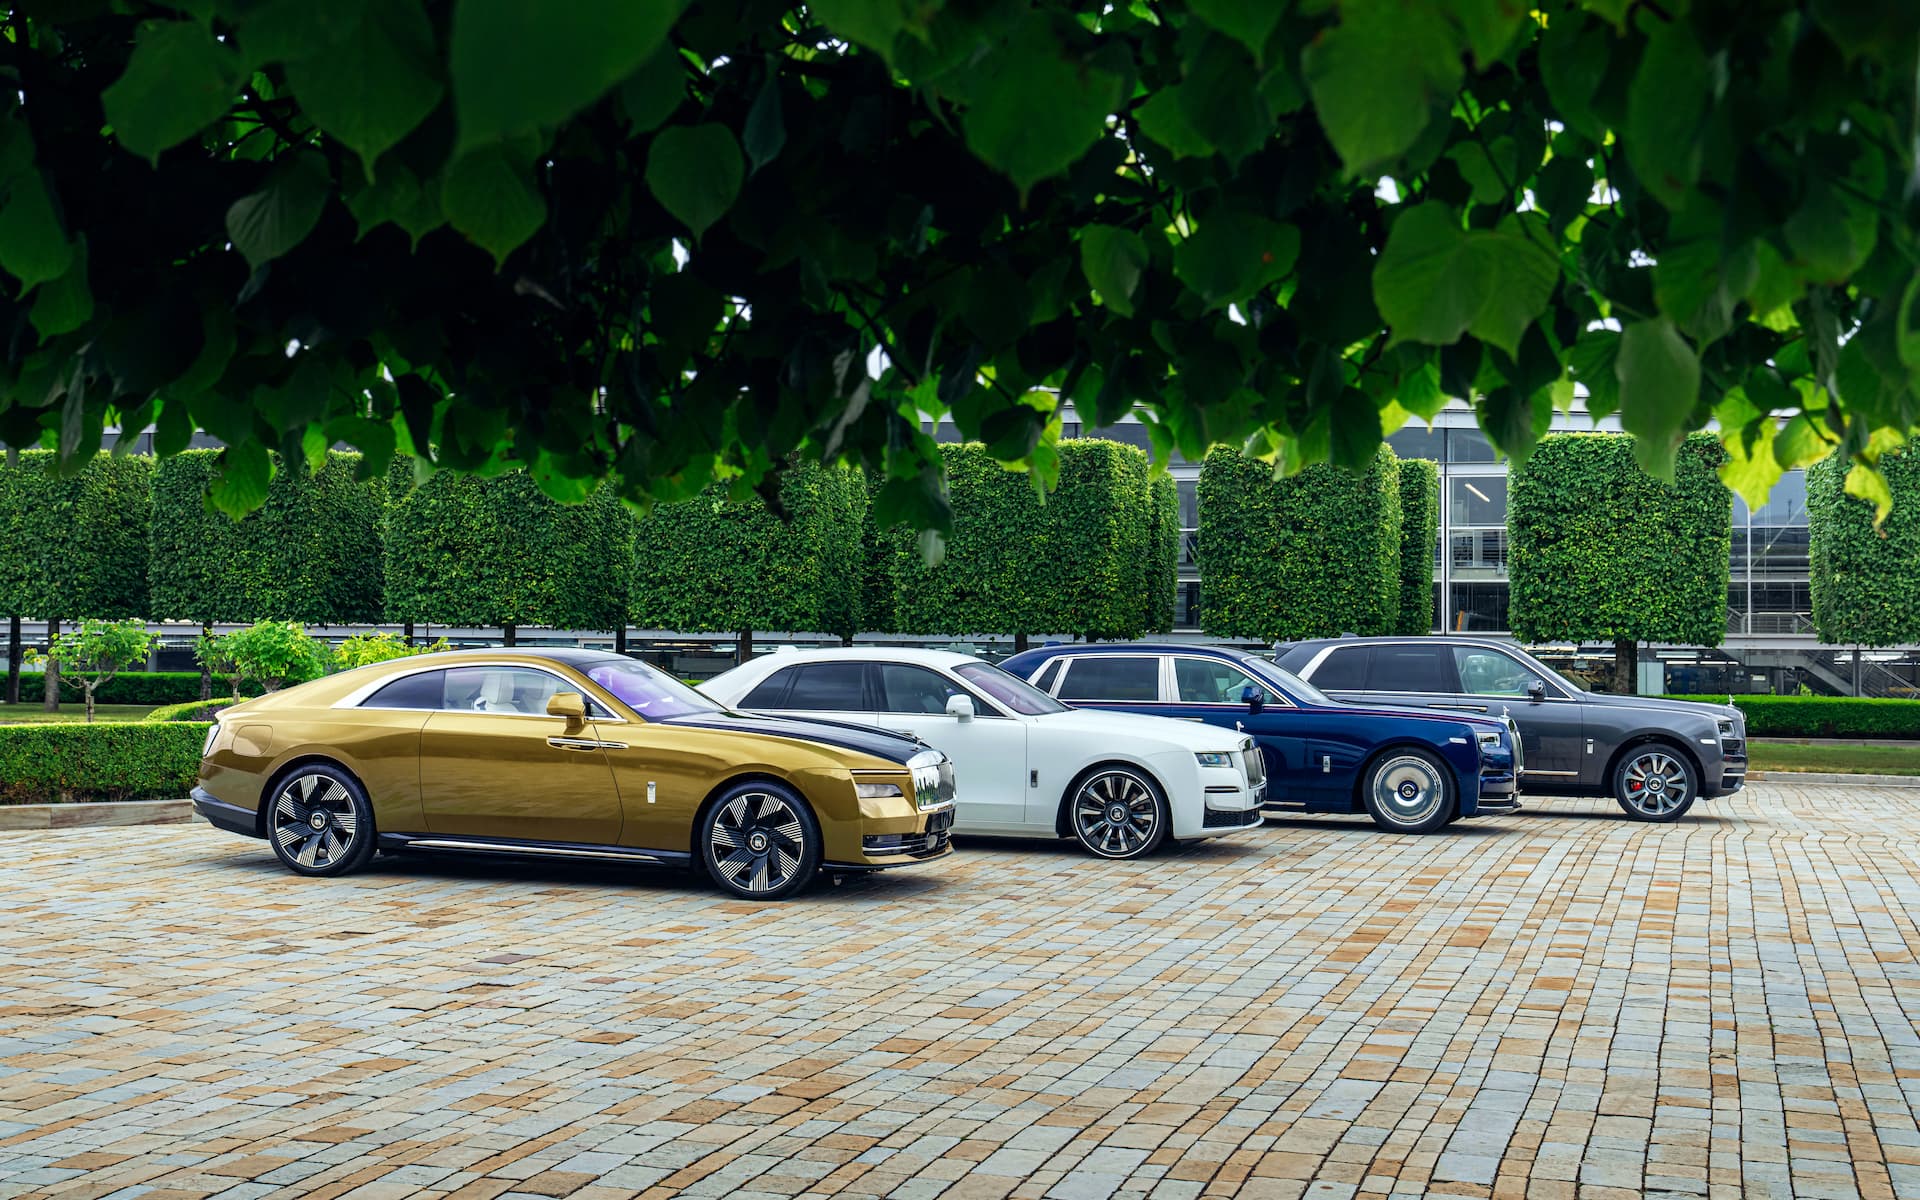 Rolls-Royce Motor Cars Festival of Speed contemporary commissions